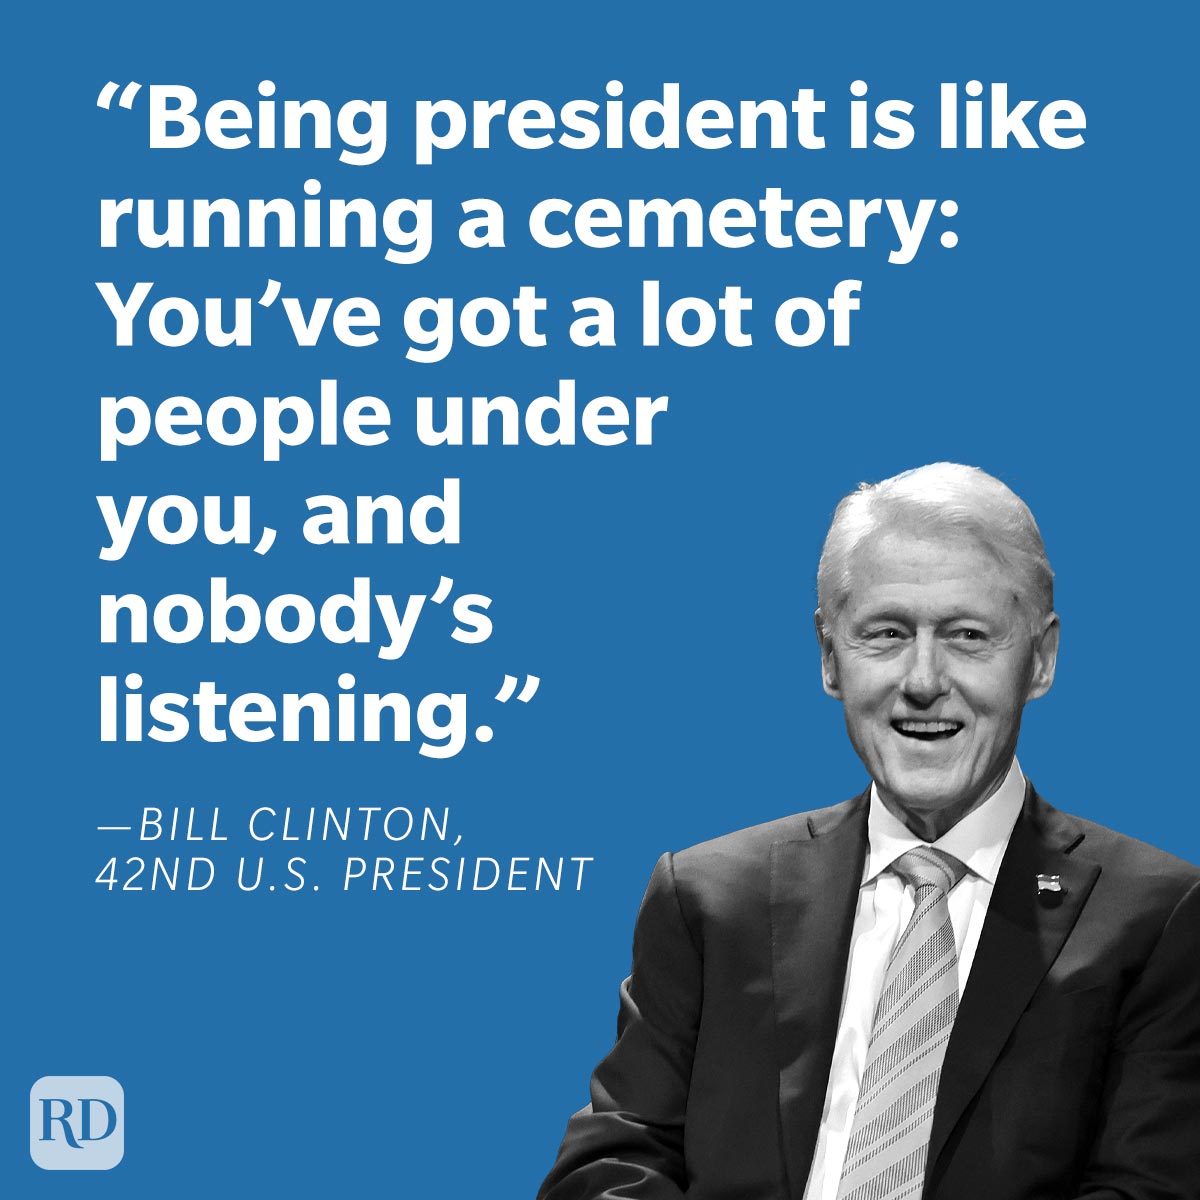 Presidential Jokes Told By U S Presidents “Being president is like running a cemetery: You’ve got a lot of people under you, and nobody’s listening.” —Bill Clinton, 42nd U.S. president on blue background